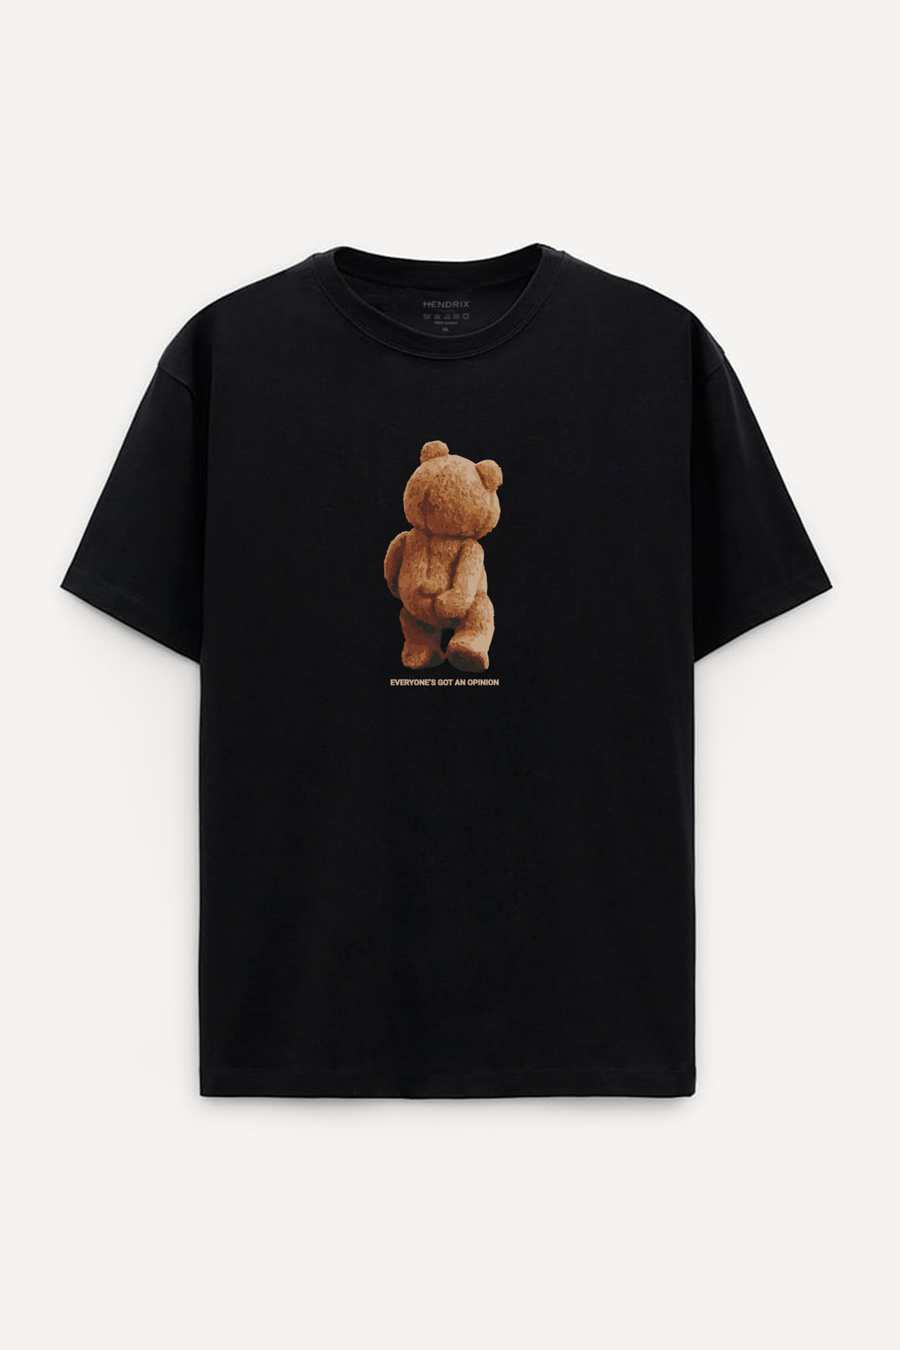 T-shirt in Black Color with Teddy’s Opinion Print – Hedrix